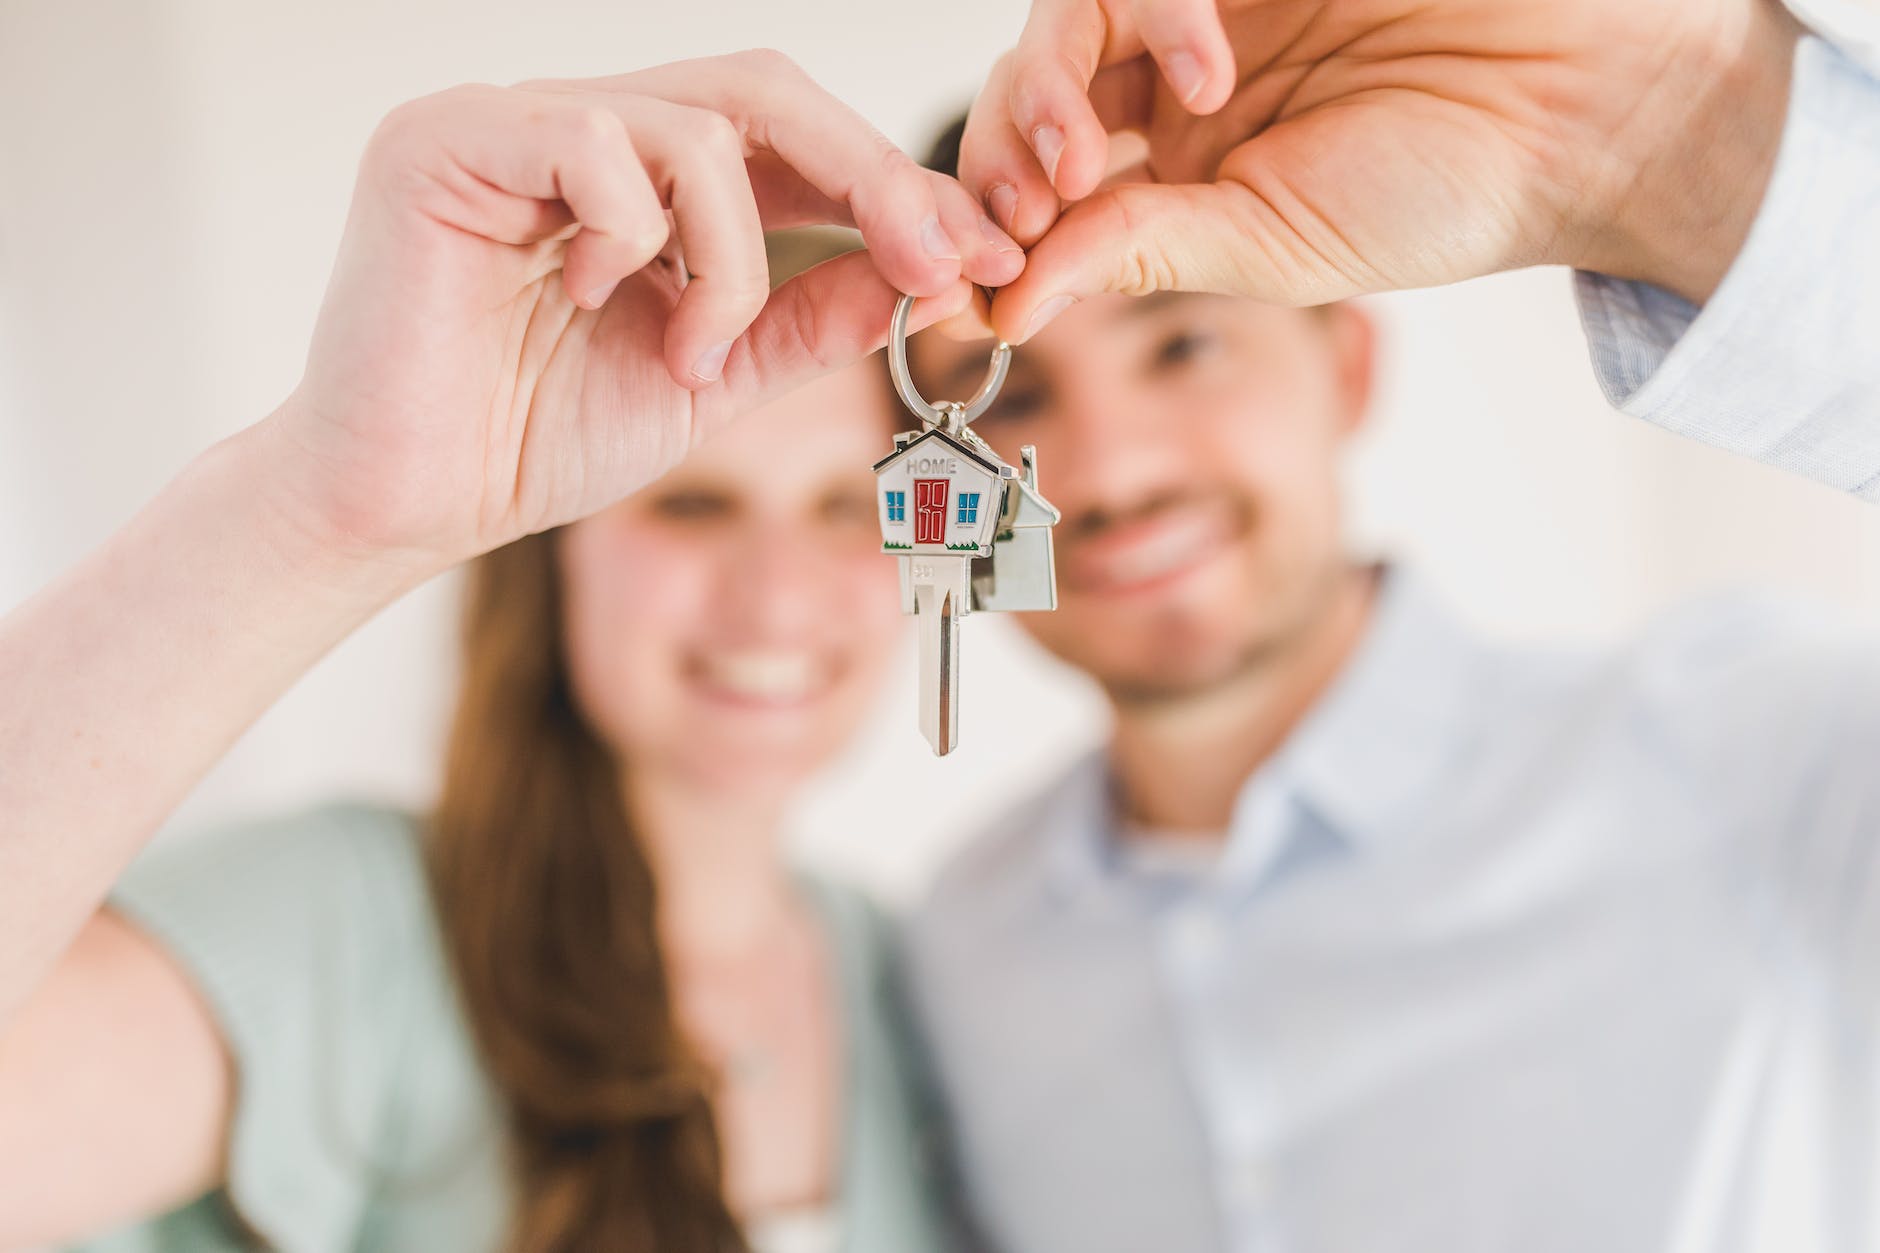 A couple holding the keys to their home.